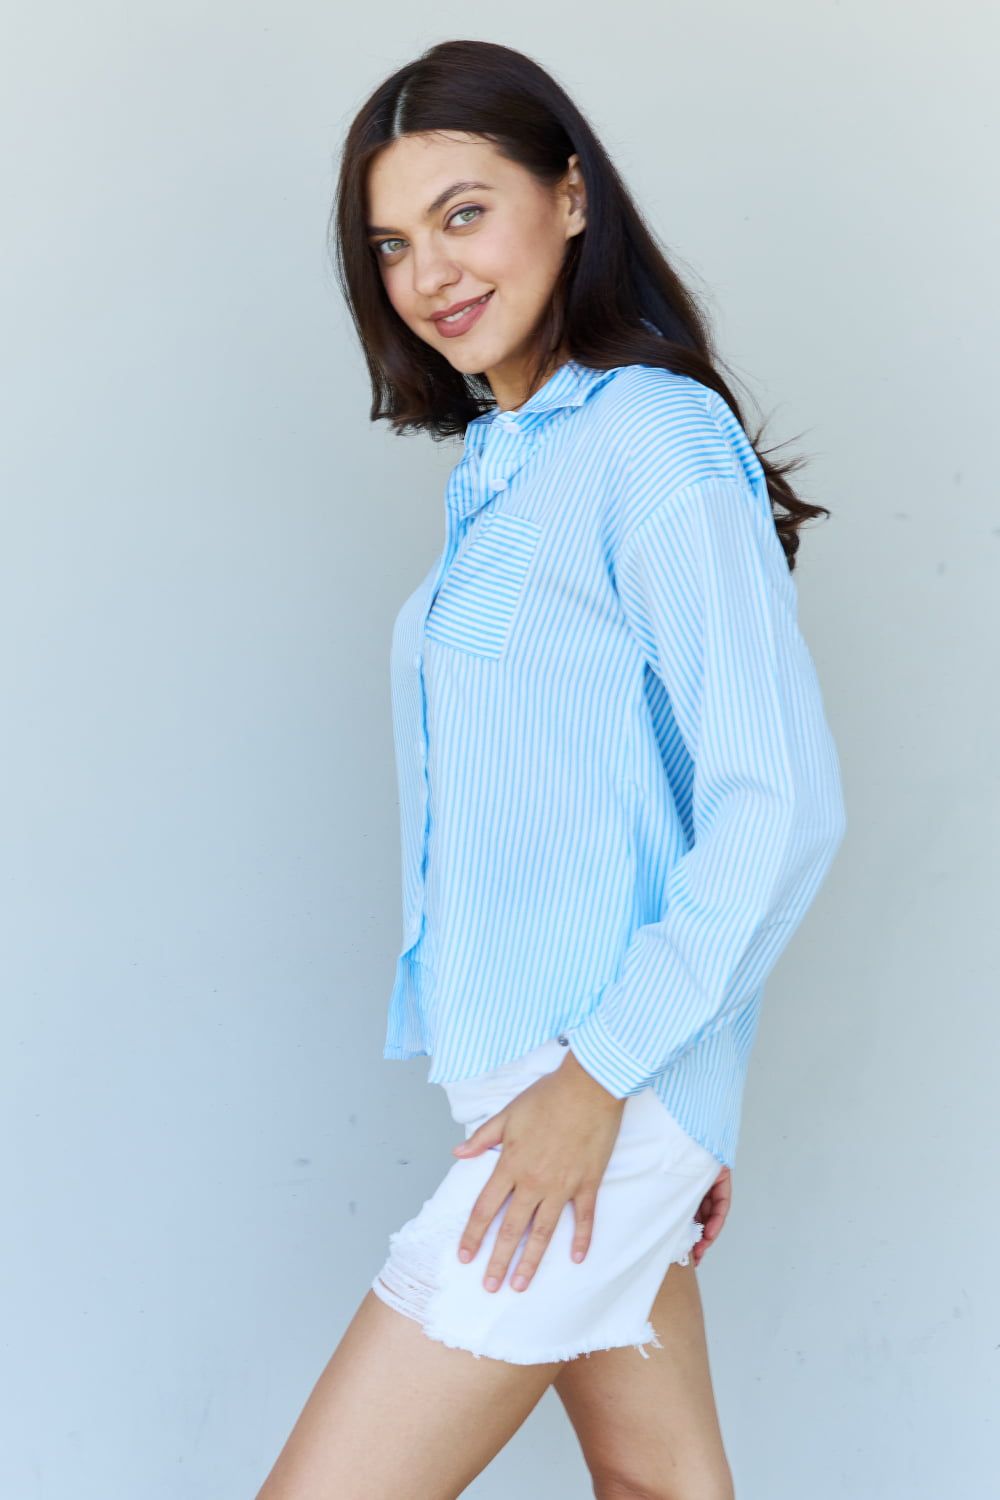 Doublju She Means Business Striped Button Down Shirt Top - By Baano